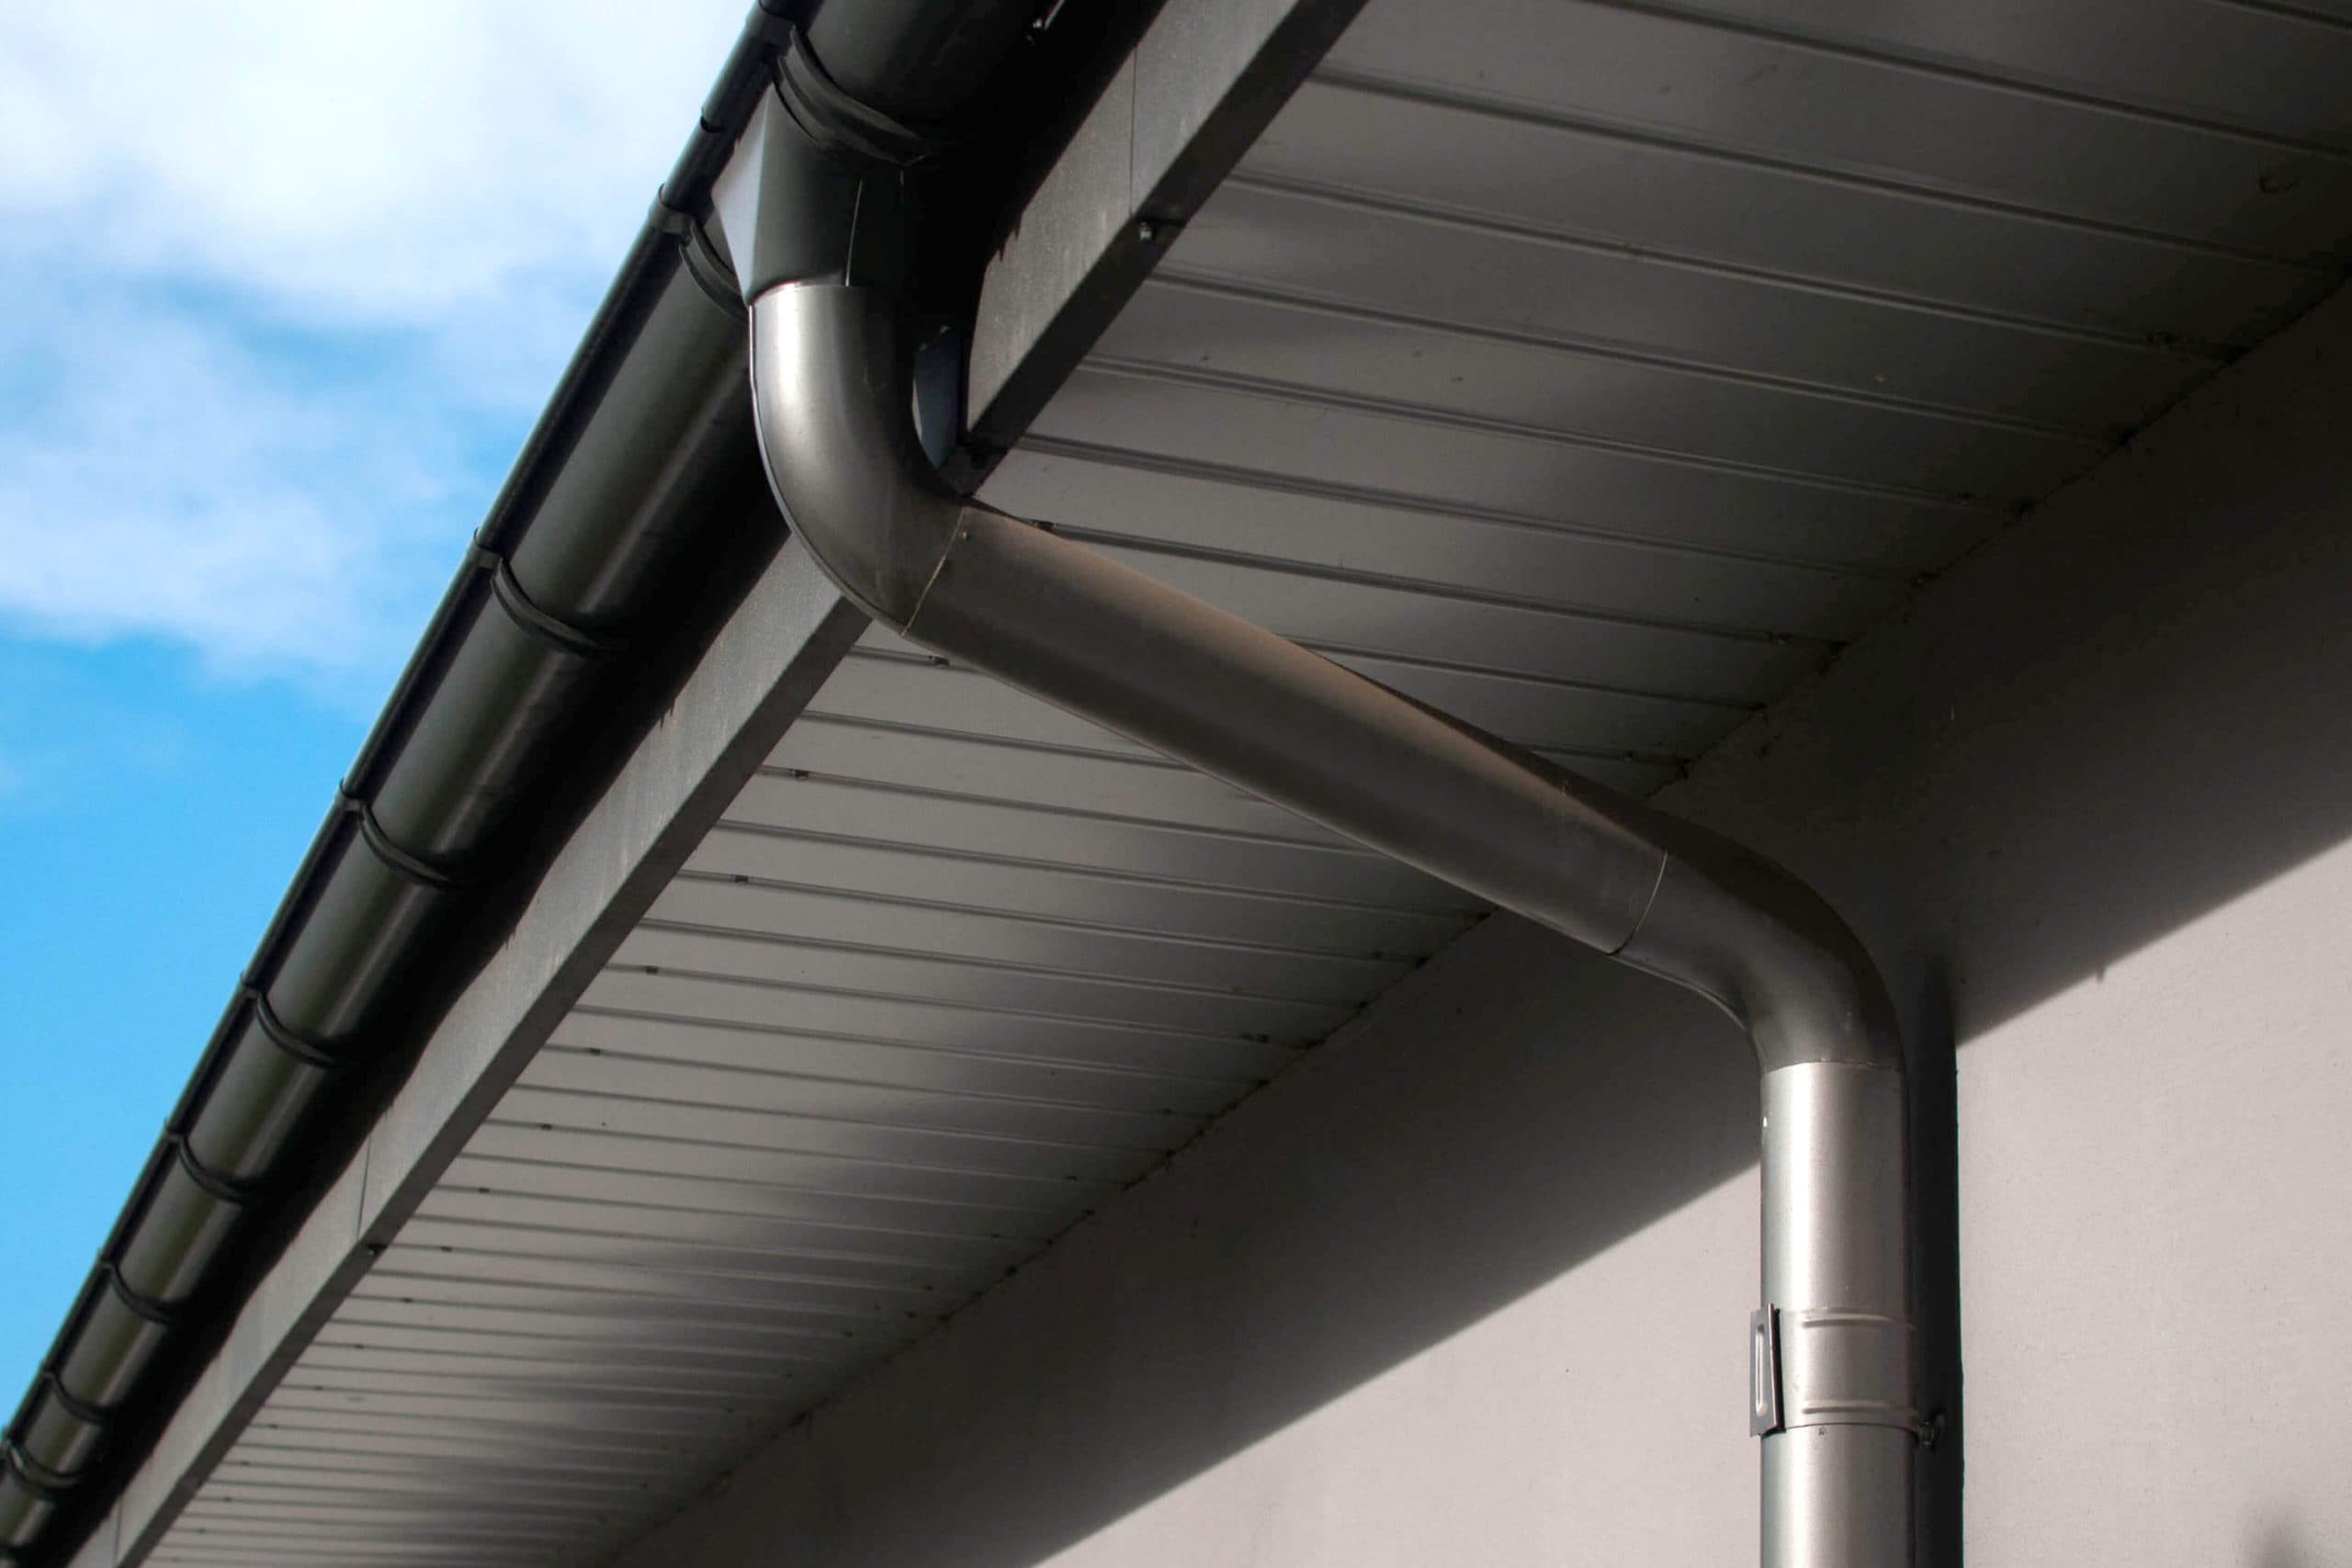 Corrosion-resistant galvanized gutters installed on a commercial building in Port Saint Lucie